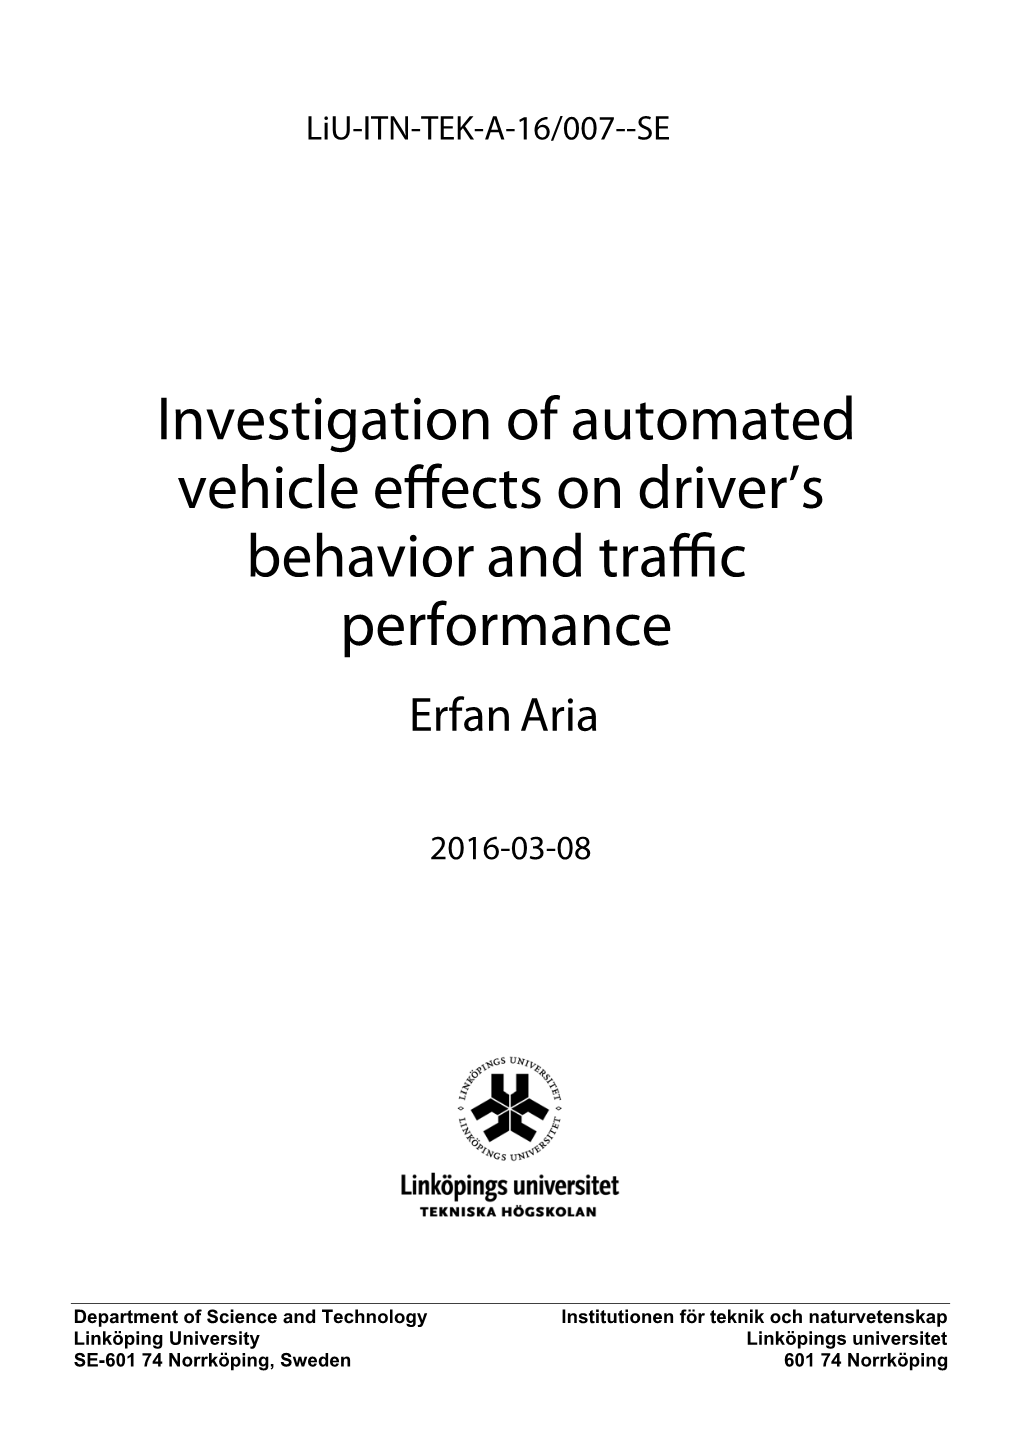 Investigation of Automated Vehicle Effects on Driver's Behavior And